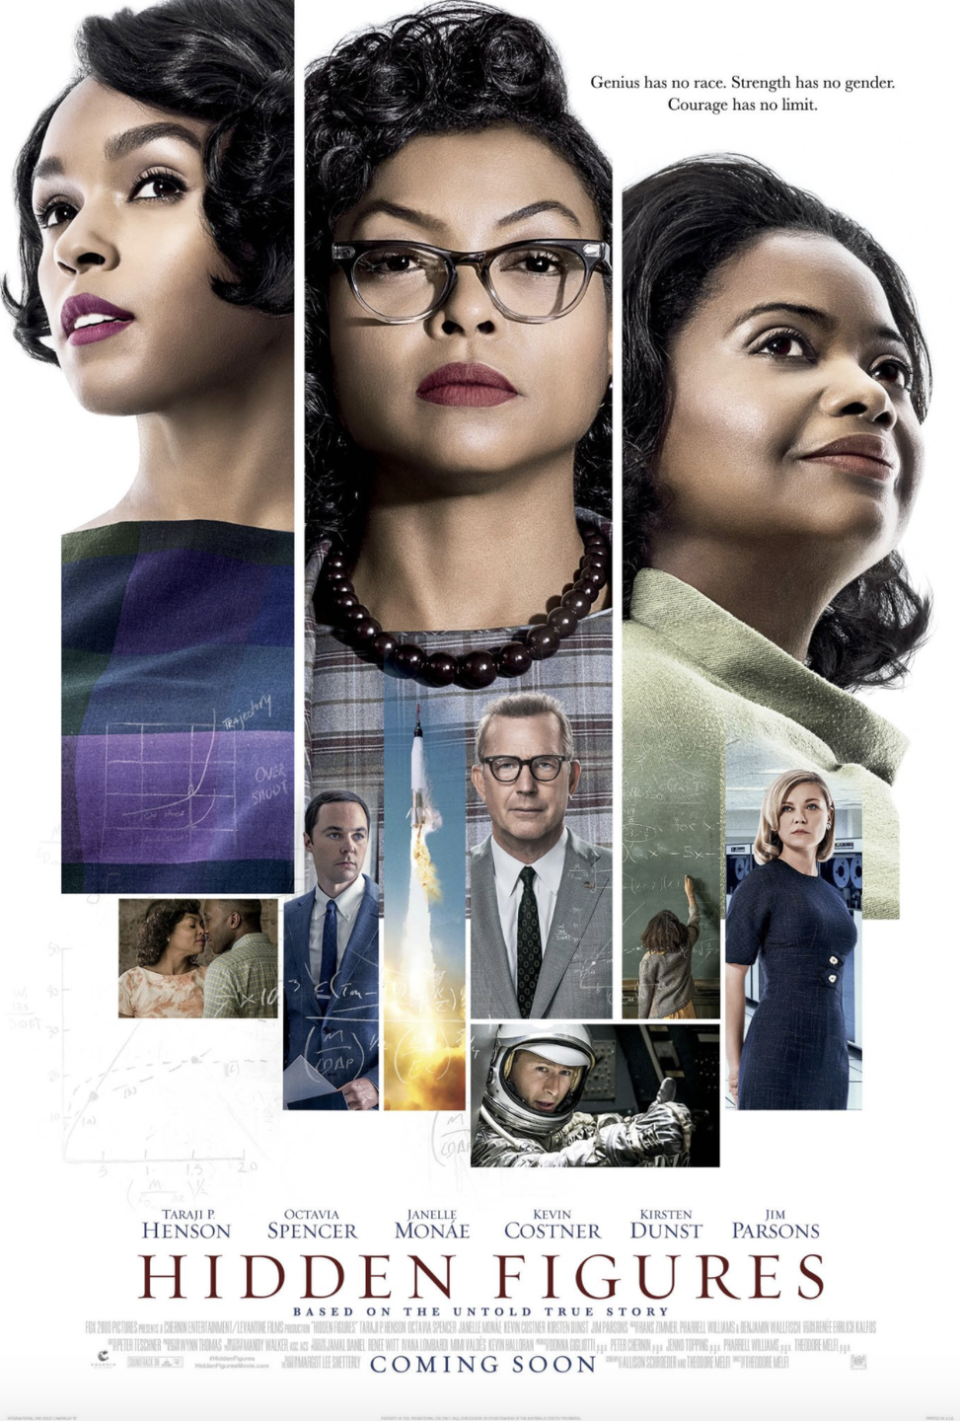 <p>Taraji P. Henson, Octavia Spencer and Janelle Monáe play NASA mathematicians and engineers in this film based on the real lives of Katherine Goble Johnson, Dorothy Vaughan and Mary Jackson, three women who helped NASA win the "Space Race" in a time when sexism and racism kept them segregated from the rest of the team. </p><p><a class="link " href="https://www.amazon.com/Hidden-Figures-Taraji-P-Henson/dp/B01MS4V81A?tag=syn-yahoo-20&ascsubtag=%5Bartid%7C10055.g.40299603%5Bsrc%7Cyahoo-us" rel="nofollow noopener" target="_blank" data-ylk="slk:Amazon">Amazon</a> </p><p><a class="link " href="https://go.redirectingat.com?id=74968X1596630&url=https%3A%2F%2Ftv.apple.com%2Fus%2Fmovie%2Fhidden-figures%2Fumc.cmc.4io2m0zk1cs9g1olb2hduzu6z%3Faction%3Dplay&sref=https%3A%2F%2Fwww.goodhousekeeping.com%2Flife%2Fentertainment%2Fg40299603%2Fbest-historical-movies%2F" rel="nofollow noopener" target="_blank" data-ylk="slk:Apple TV">Apple TV</a> </p><p><a class="link " href="https://go.redirectingat.com?id=74968X1596630&url=https%3A%2F%2Fwww.disneyplus.com%2Fmovies%2Fhidden-figures%2F2xa2YdiOJXQt&sref=https%3A%2F%2Fwww.goodhousekeeping.com%2Flife%2Fentertainment%2Fg40299603%2Fbest-historical-movies%2F" rel="nofollow noopener" target="_blank" data-ylk="slk:Disney+">Disney+</a> </p><p><a class="link " href="https://go.redirectingat.com?id=74968X1596630&url=https%3A%2F%2Fwww.hulu.com%2Fhub%2Fhome&sref=https%3A%2F%2Fwww.goodhousekeeping.com%2Flife%2Fentertainment%2Fg40299603%2Fbest-historical-movies%2F" rel="nofollow noopener" target="_blank" data-ylk="slk:Hulu">Hulu</a></p>